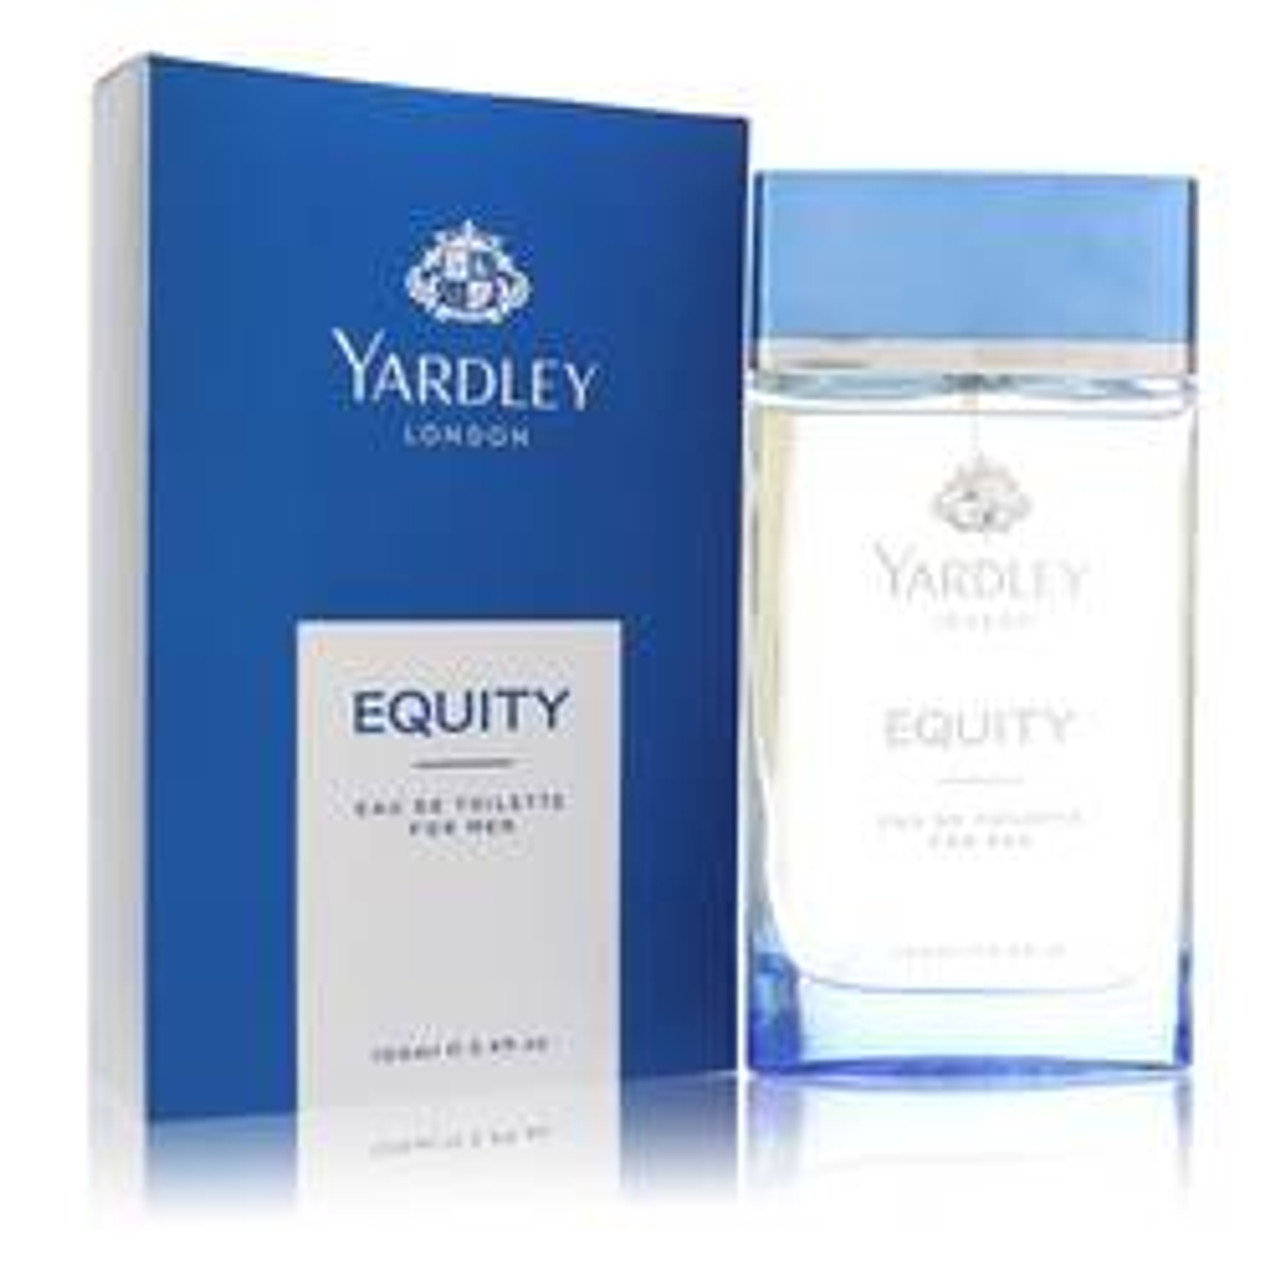 Yardley Equity Cologne By Yardley London Eau De Toilette Spray 3.4 oz for Men - [From 50.33 - Choose pk Qty ] - *Ships from Miami